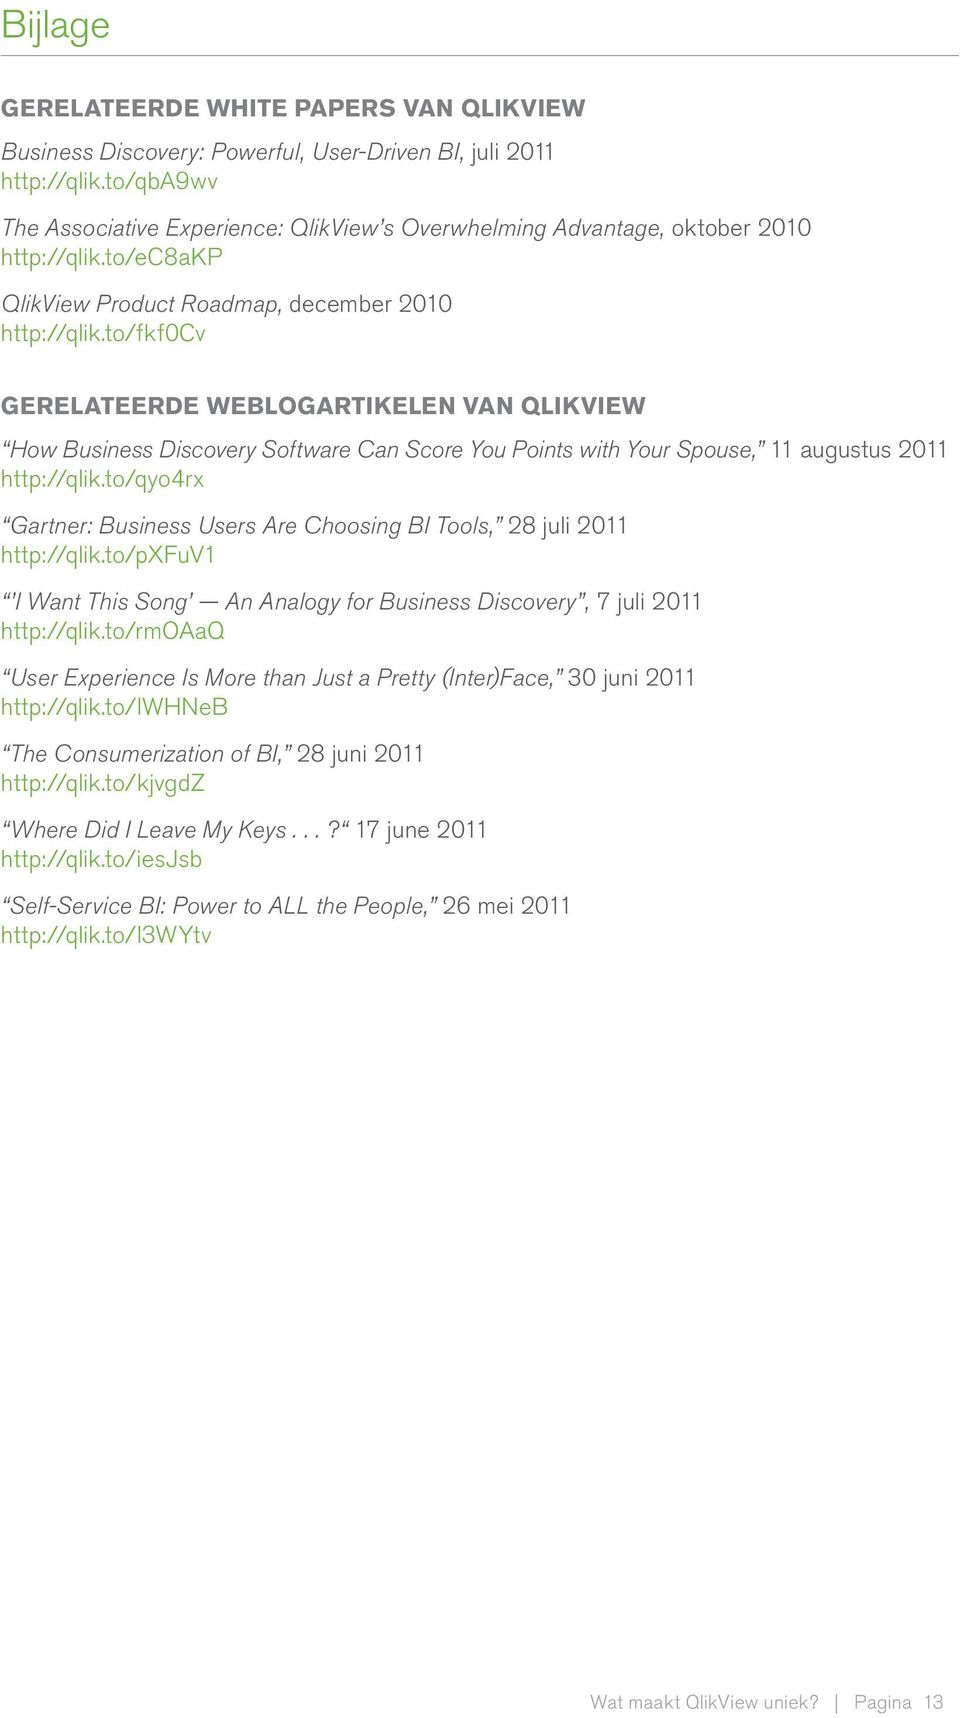 to/fkf0cv GERELATEERDE WEBLOGARTIKELEN VAN QLIKVIEW How Business Discovery Software Can Score You Points with Your Spouse, 11 augustus 2011 http://qlik.